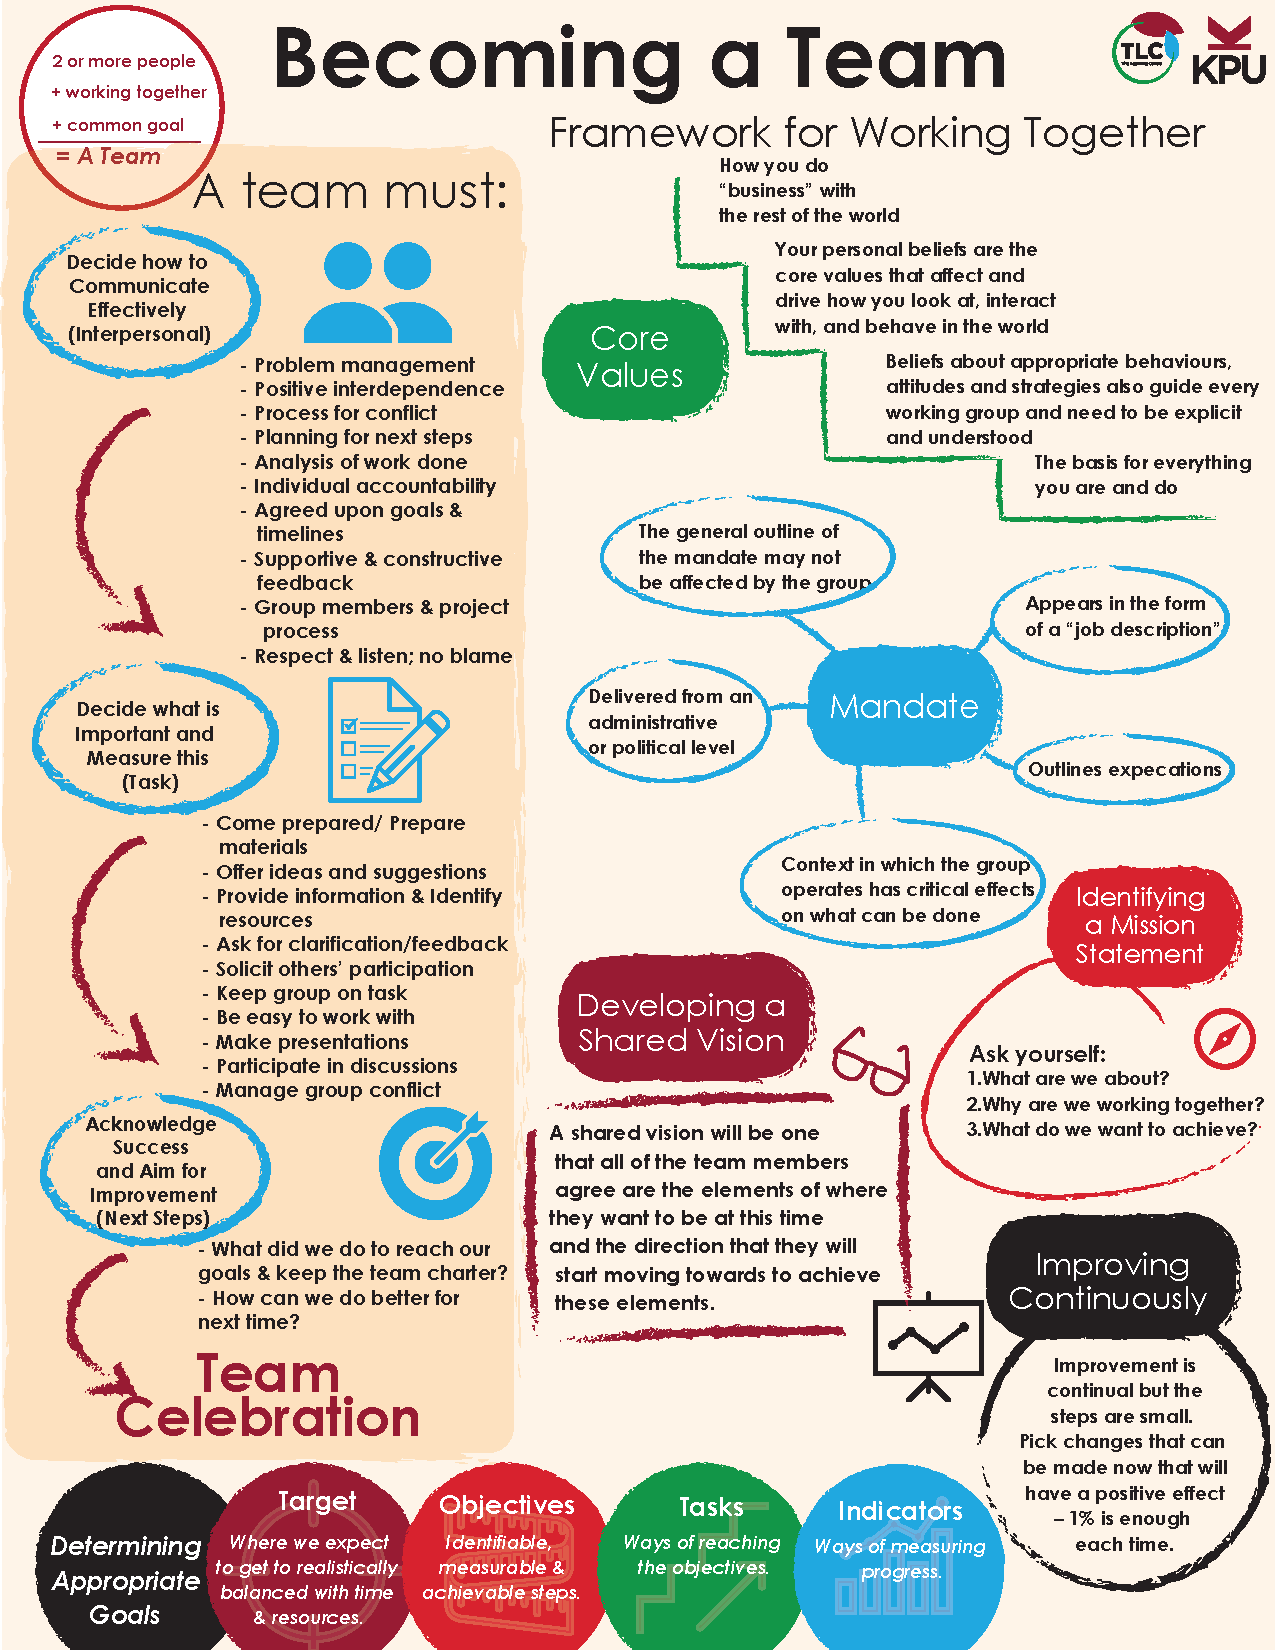 Becoming a Team: Infographic Alt-Text 2 or more people + working together + a common goal = a team A team must: Decide how to communicate effectively (Interpersonal) •Problem management • Positive interdependence • Process for conflict • Planning for next steps • Analysis of work done • Individual accountability • Agreed upon goals and timelines • Supportive & constructive feedback • Group members & project process • Respect & listen; no blame Decide what is important and measure this (task) • Come prepared/ prepare materials • Offer ideas and suggestions • Provide information and identify resources • Ask for clarification/feedback • Solicit others’ participation • Keep group on task • Be easy to work with • Make presentations • Participate in discussions • Manage group conflict Acknowledge success and aim for improvement (next steps) • What did we do to reach our goals & keep the team charter? How can we do better for next time? Framework for working together 1. Core values • Your personal beliefs are the core values that affect and drive how you look at, interact, with, and behave in the world • How you do “business” with the rest of the world • The basis for everything you are and do • Beliefs about appropriate behaviours, attitudes, and strategies also guide every working group and need to be explicit and understood 2. Mandate • Outlines expectations • Delivered from an administrative of political level • Appears in the form of a “job description” • The general outline of a mandate may not be affected by the group • Context in which the group operates and has critical effects on what can be done 3. Identifying a mission statement: Ask yourself: a. What are we about? b. Why are we working together? c. What do we want to achieve? 4. Developing a shared vision: A shared vision will be one that all of the team members agree are the elements of where they want to get to at this time and the direction that they will start moving towards to achieve these elements 5. Determining appropriate goals a. Target: Where we expect to get realistically balanced with time & resources b. Objectives: Identifiable, measurable, and achievable steps c. Tasks: Ways of reaching objectives d. Indicators: Ways of measuring progress e. Improving continuously: Improvement is continual but the steps are small. Pick changes that can be made now that will have a positive effect – 1% is enough each time